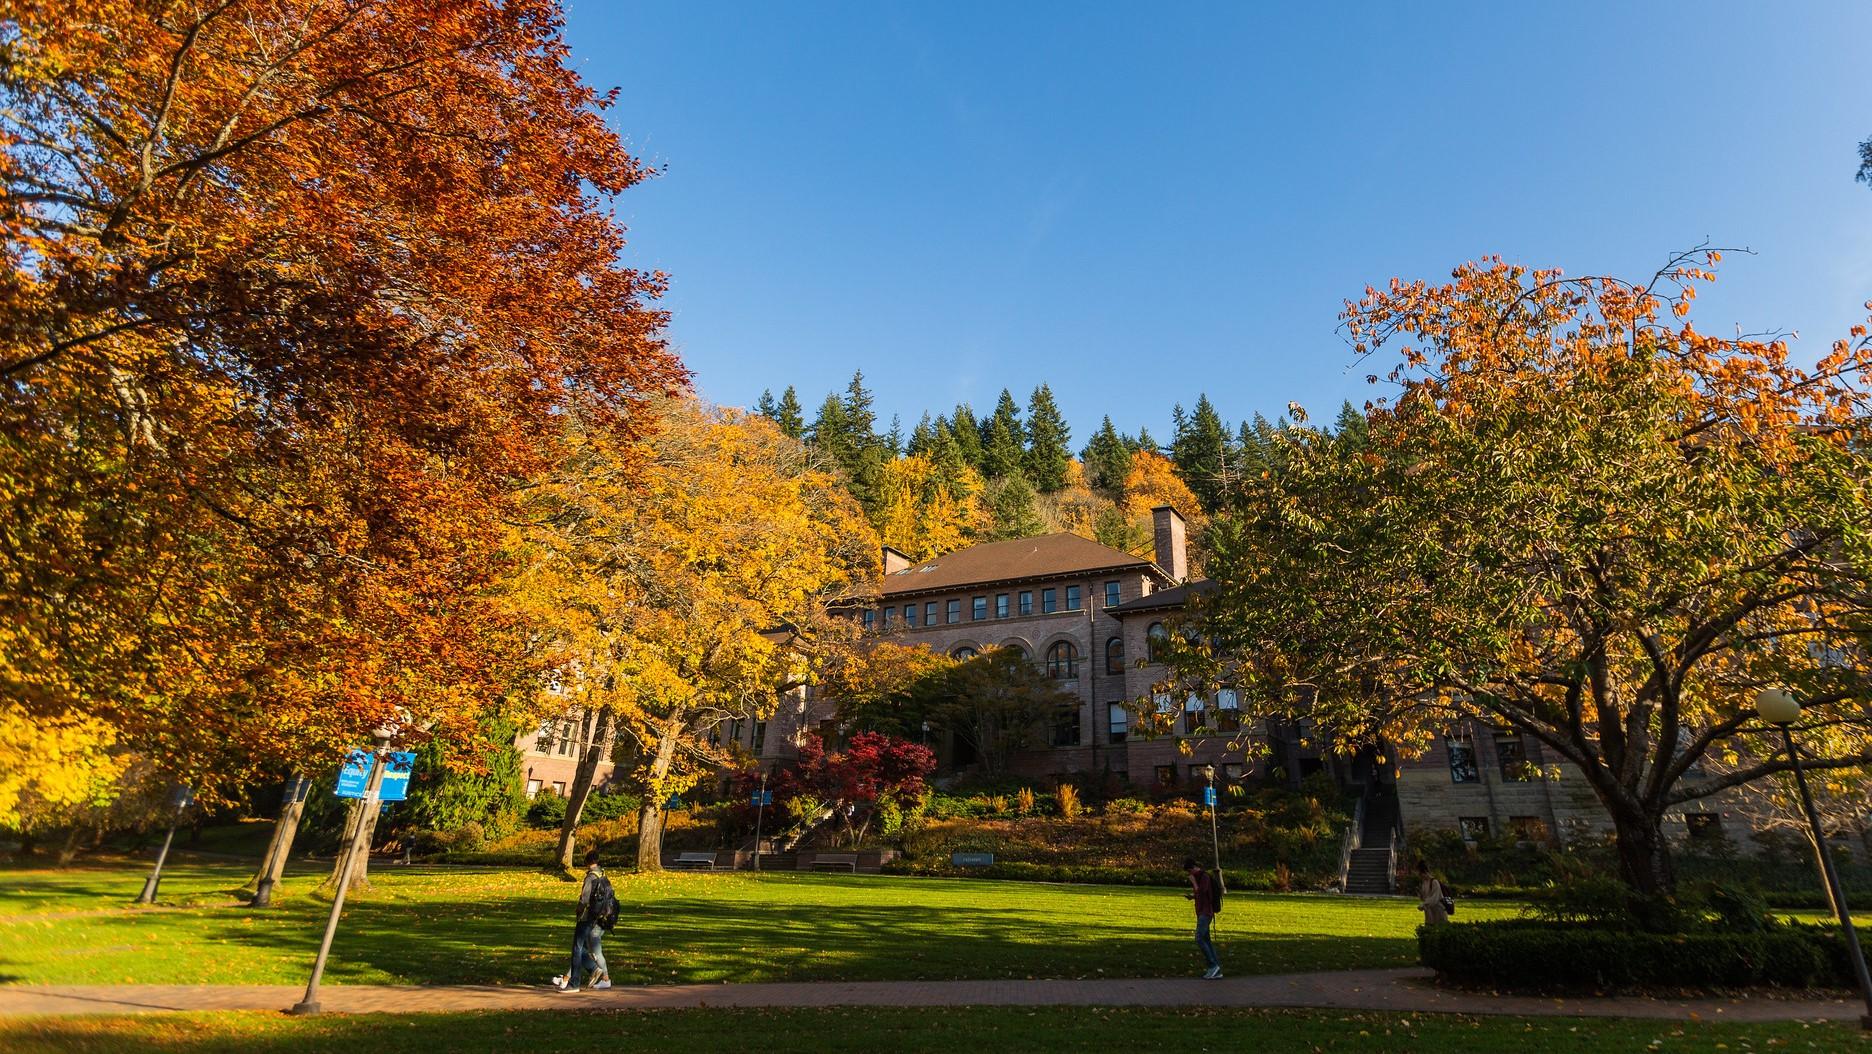 Old Main surrounded by trees with yellow and orange leaves in fall